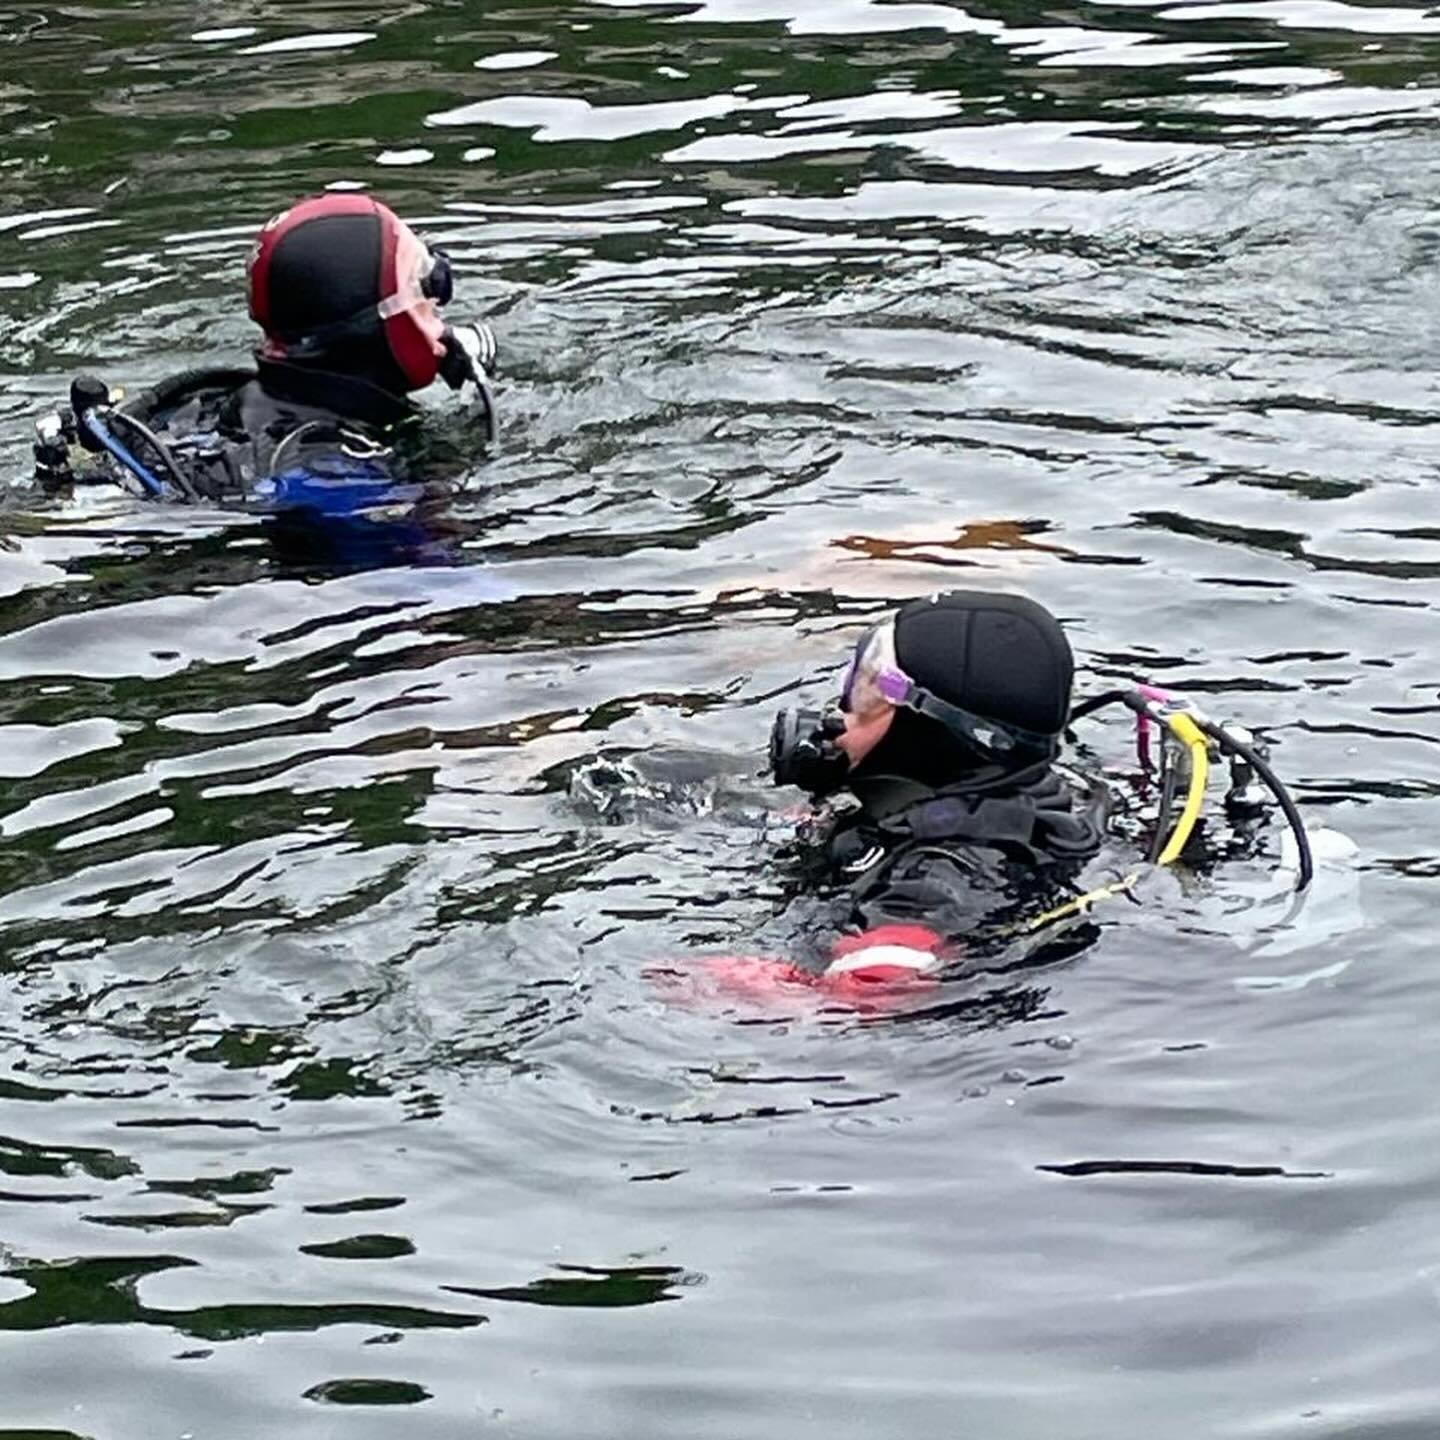 A few of our divers snook off to the Cove today to get some diving in taking advantage of the Cove being quieter midweek 🤿

The rest of us may or may not be jealous! 😂

#Leicesterunderwaterexplorationclub #luec #bsacdivers #learntodive #scubadiveuk